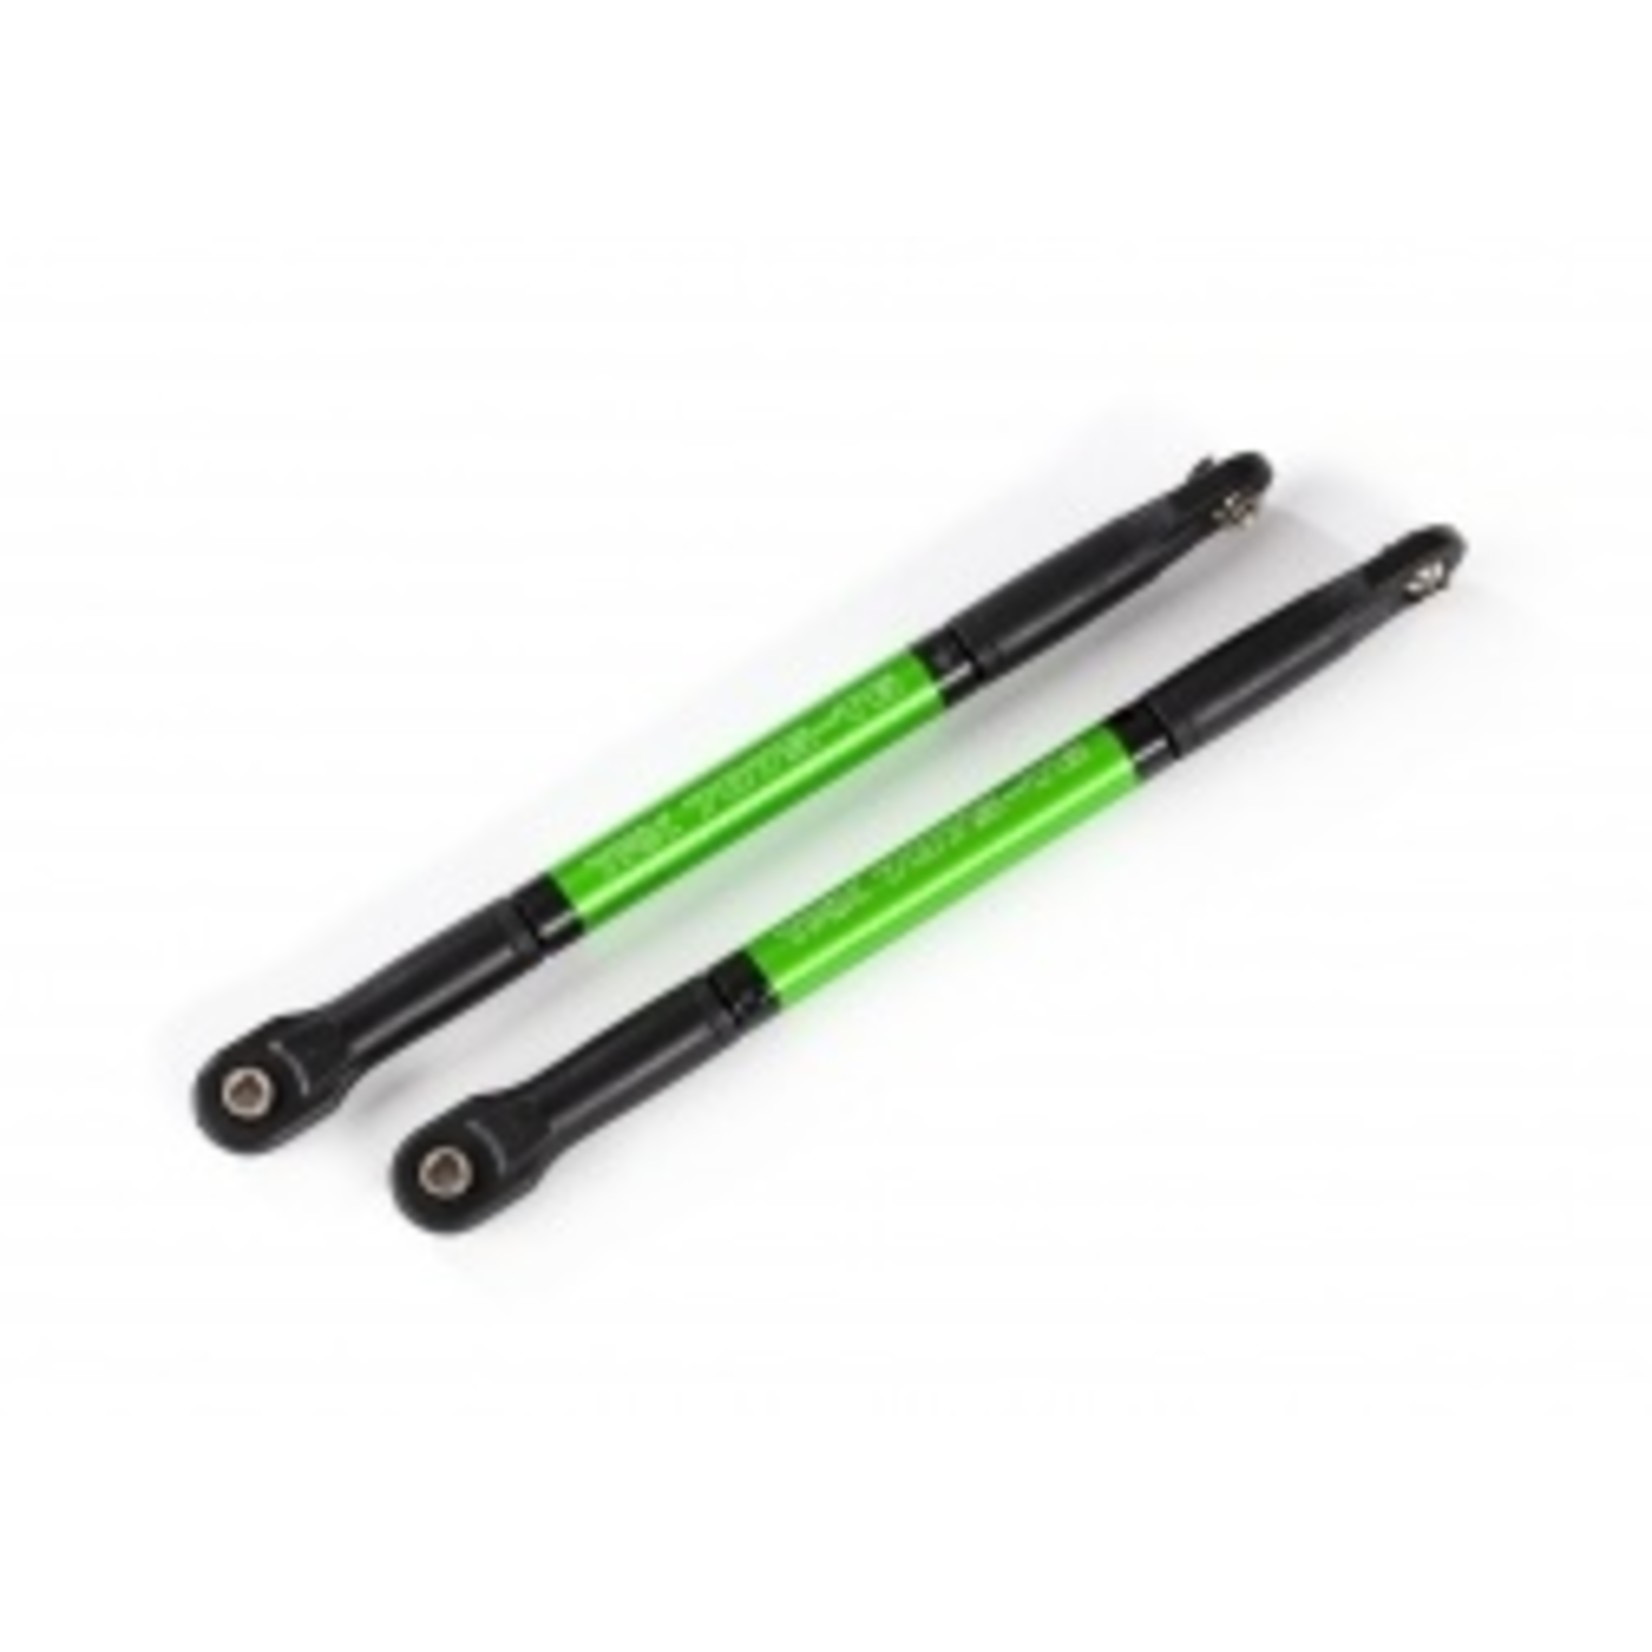 Traxxas 8619G Push rods, aluminum (green-anodized), heavy duty (2) (assembled with rod ends and threaded inserts)